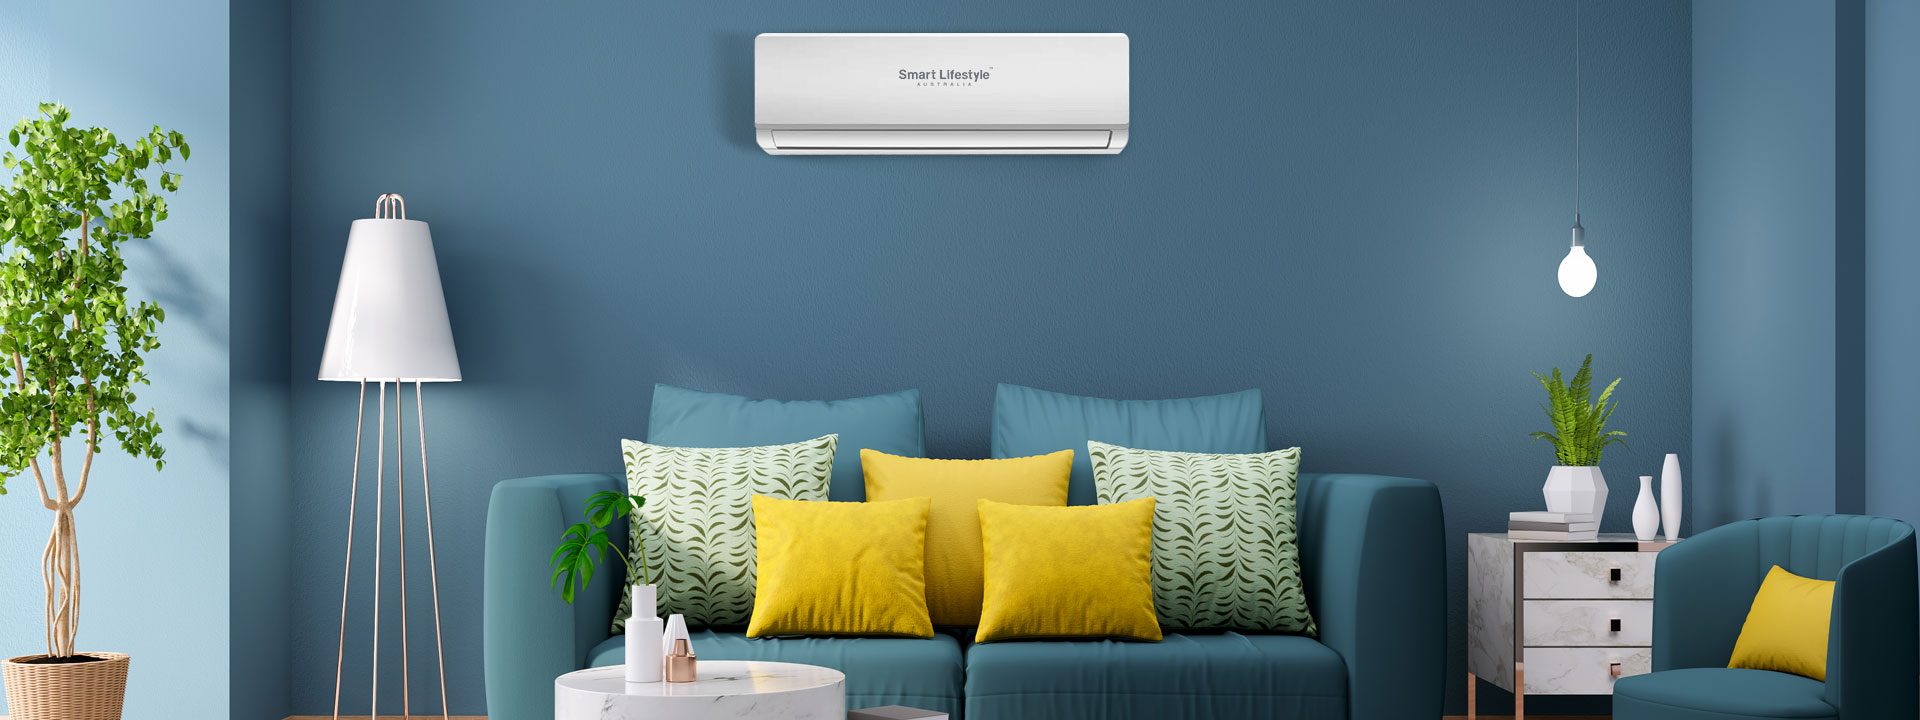 Electric Split System Air Conditioners Model Rebate